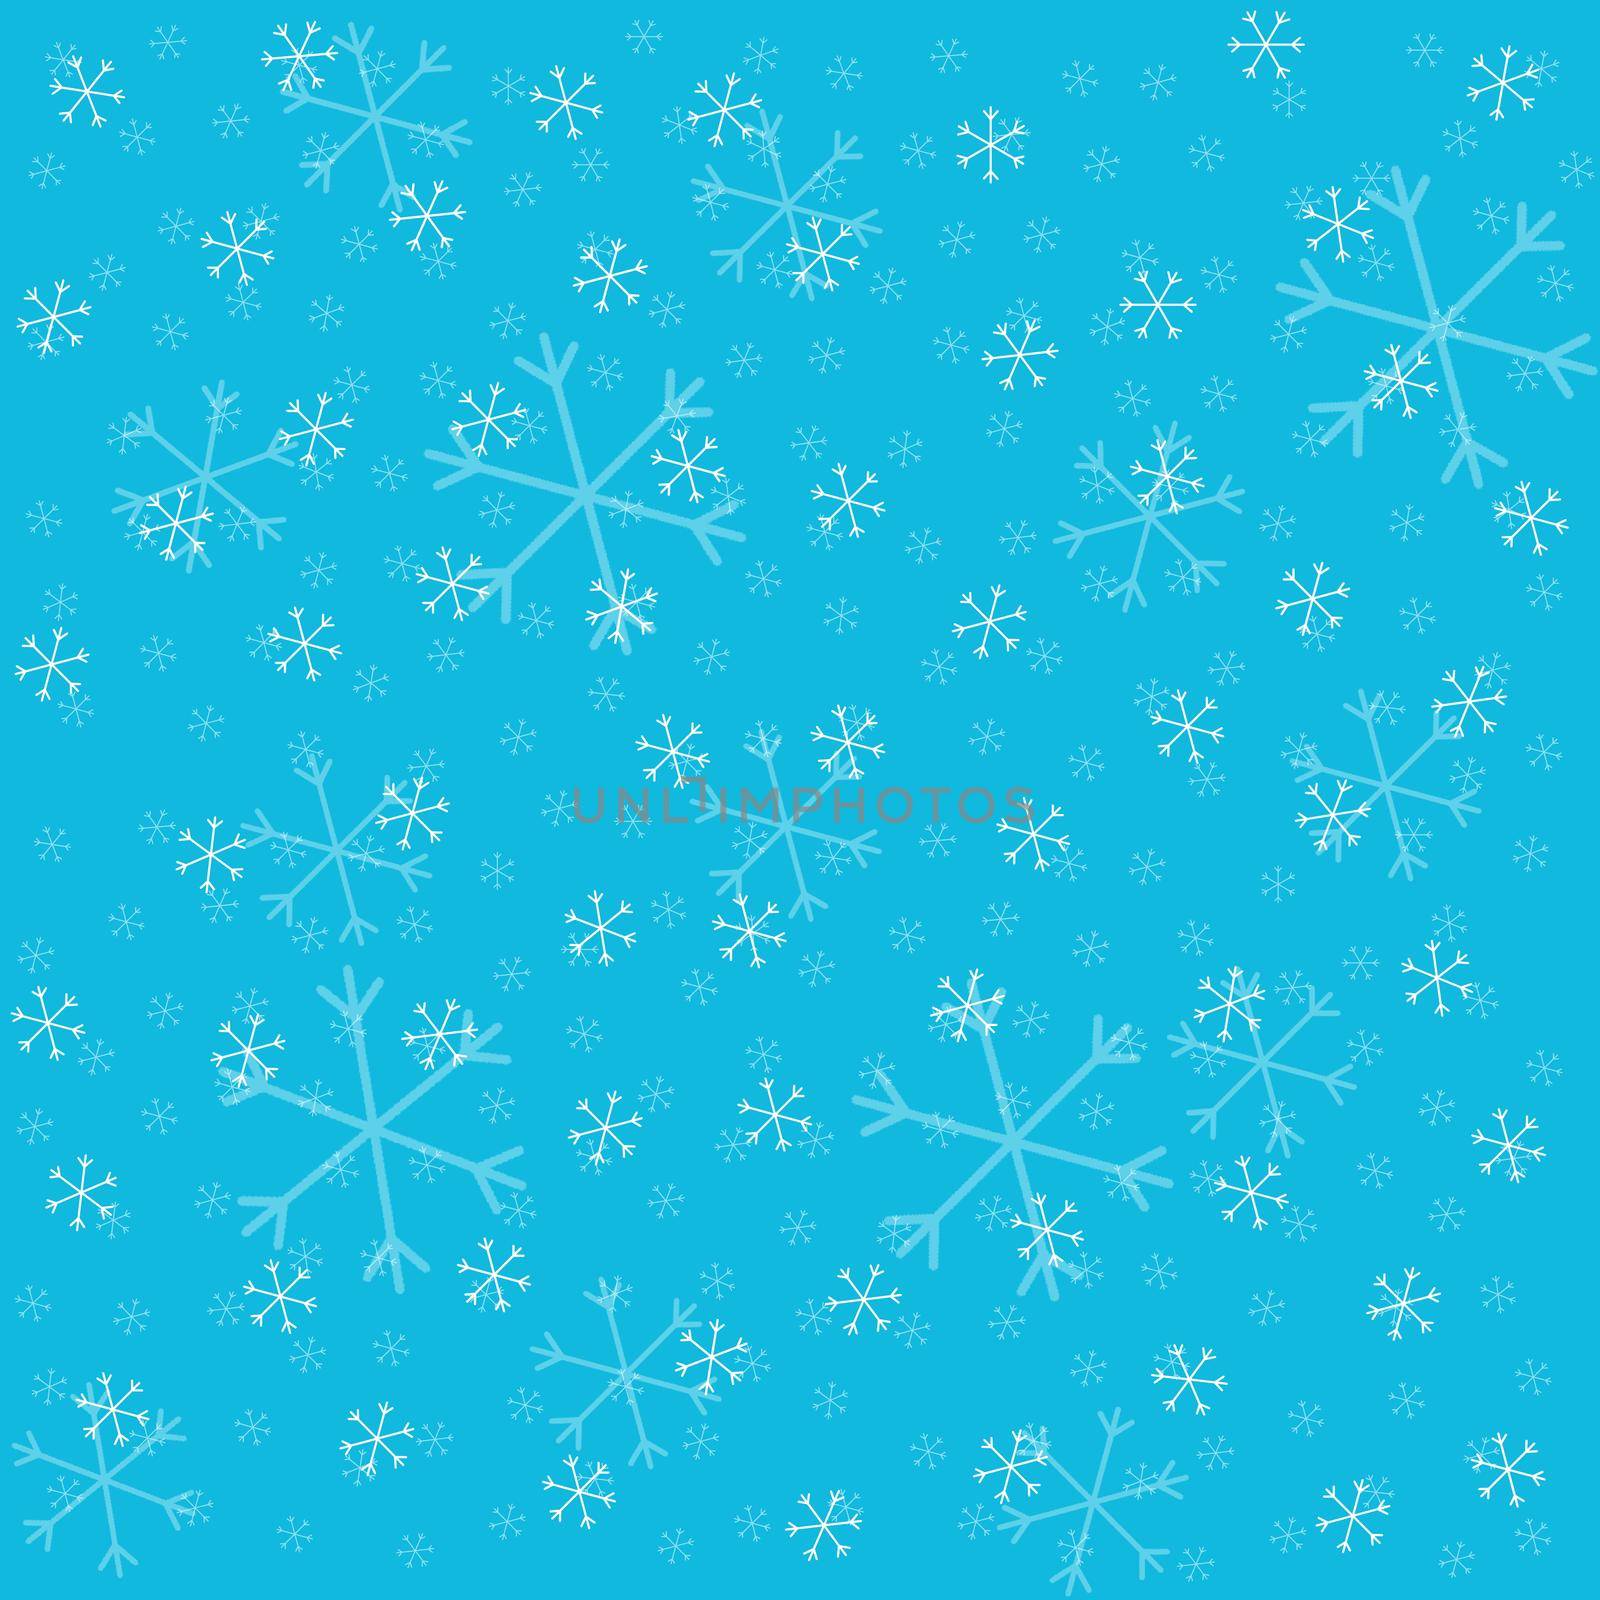 Seamless Christmas pattern doodle with hand random drawn snowflakes.Wrapping paper for presents, funny textile fabric print, design, decor, food wrap, backgrounds. new year.Raster copy.Sky blue, white